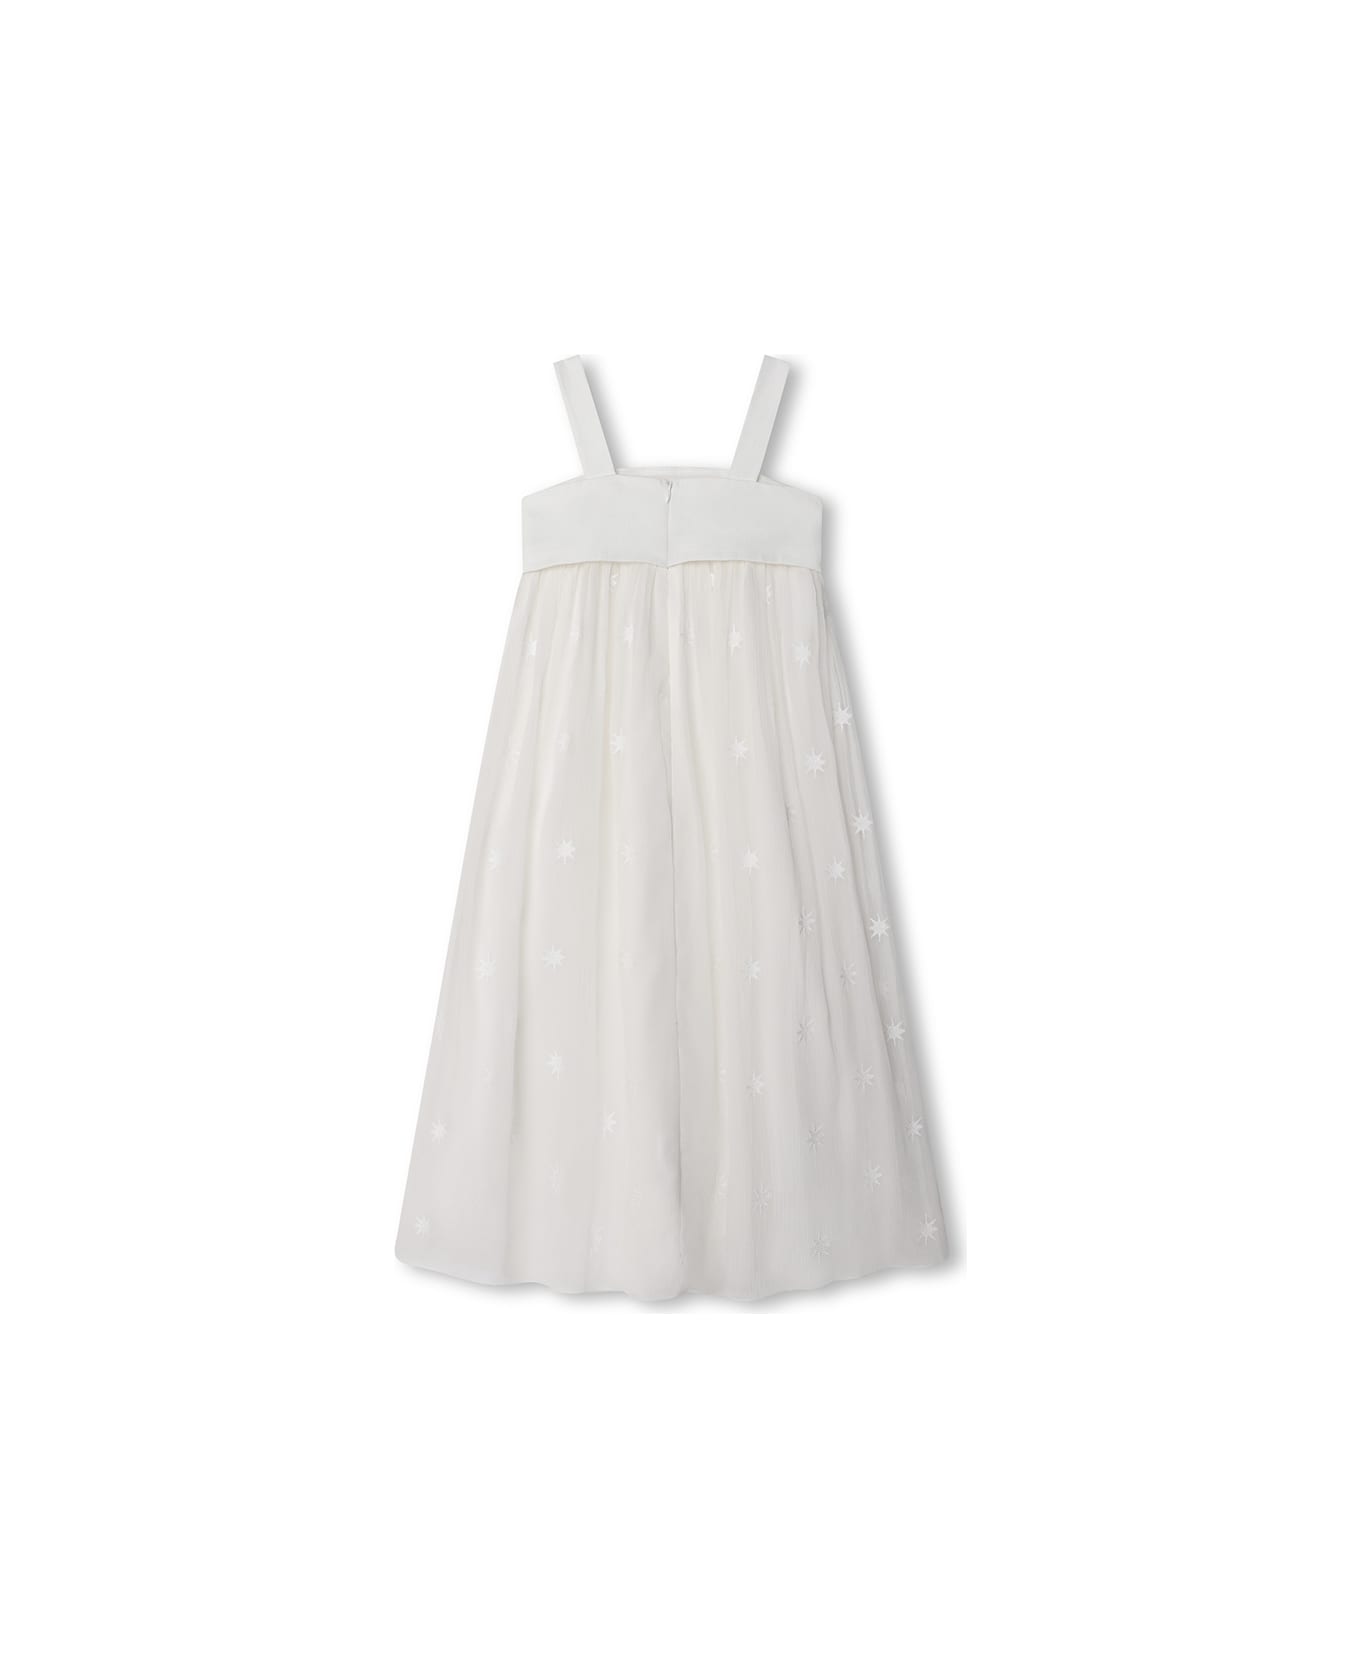 Chloé White Silk Dress With Stars Embroidery - White